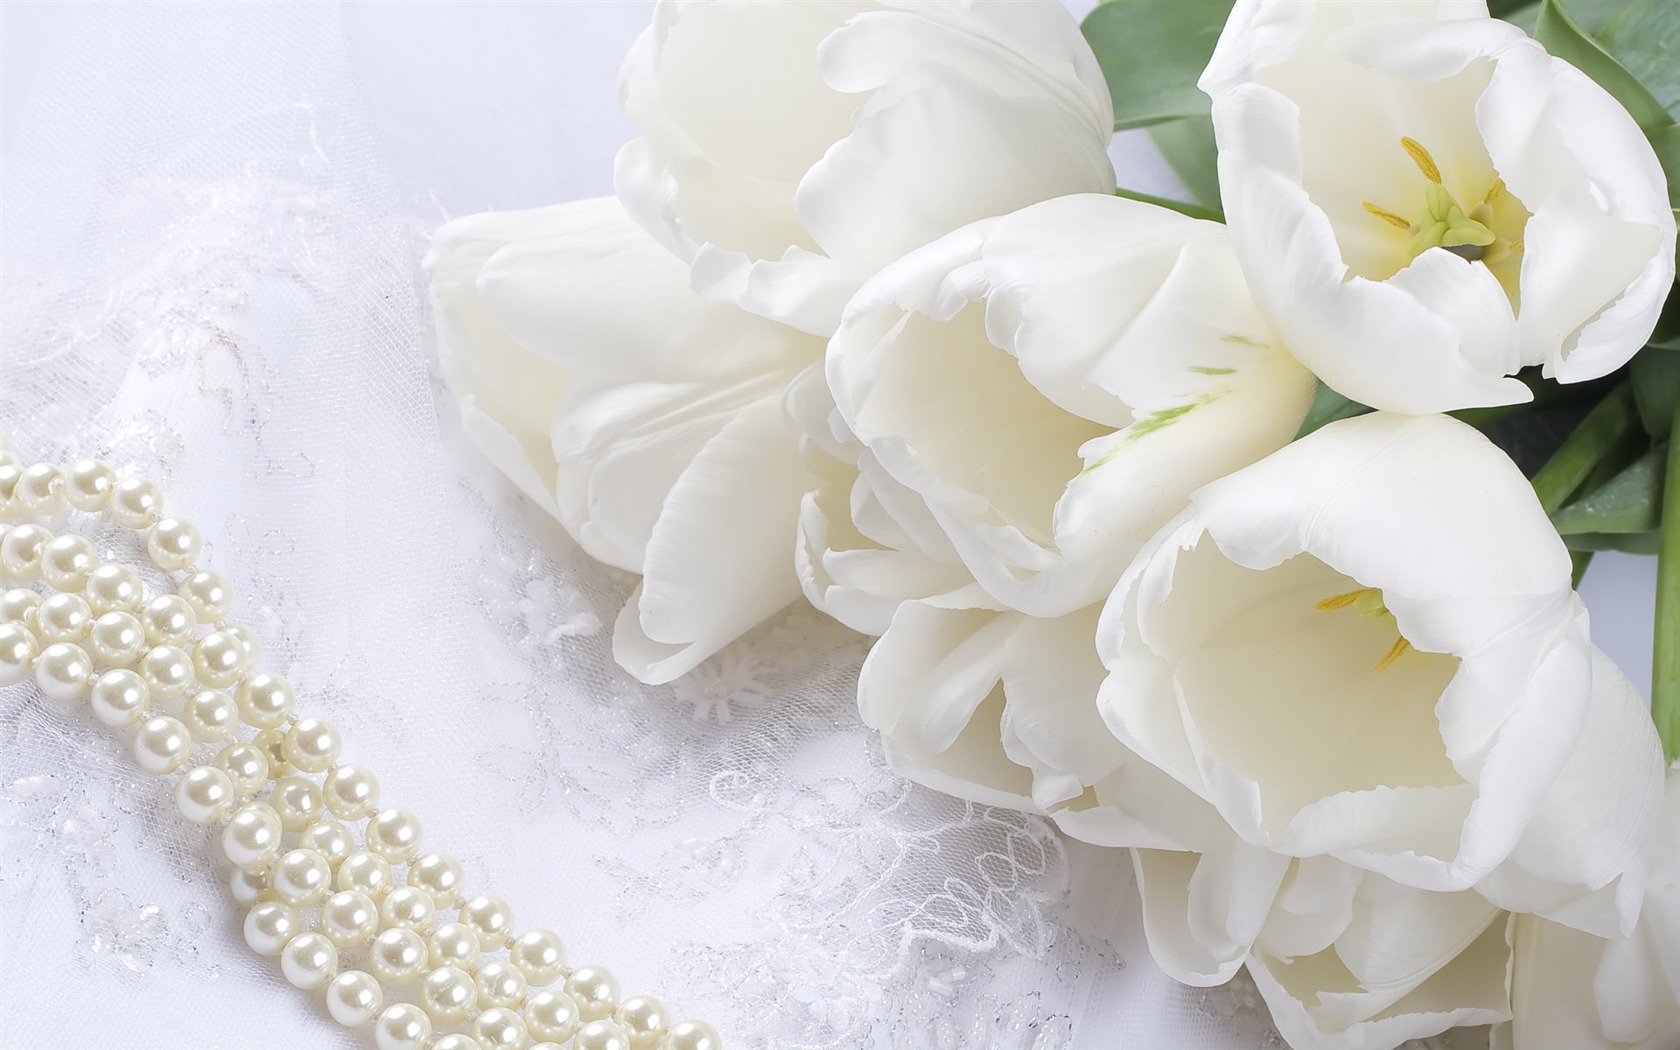 Weddings and Flowers wallpaper (1) #3 - 1680x1050